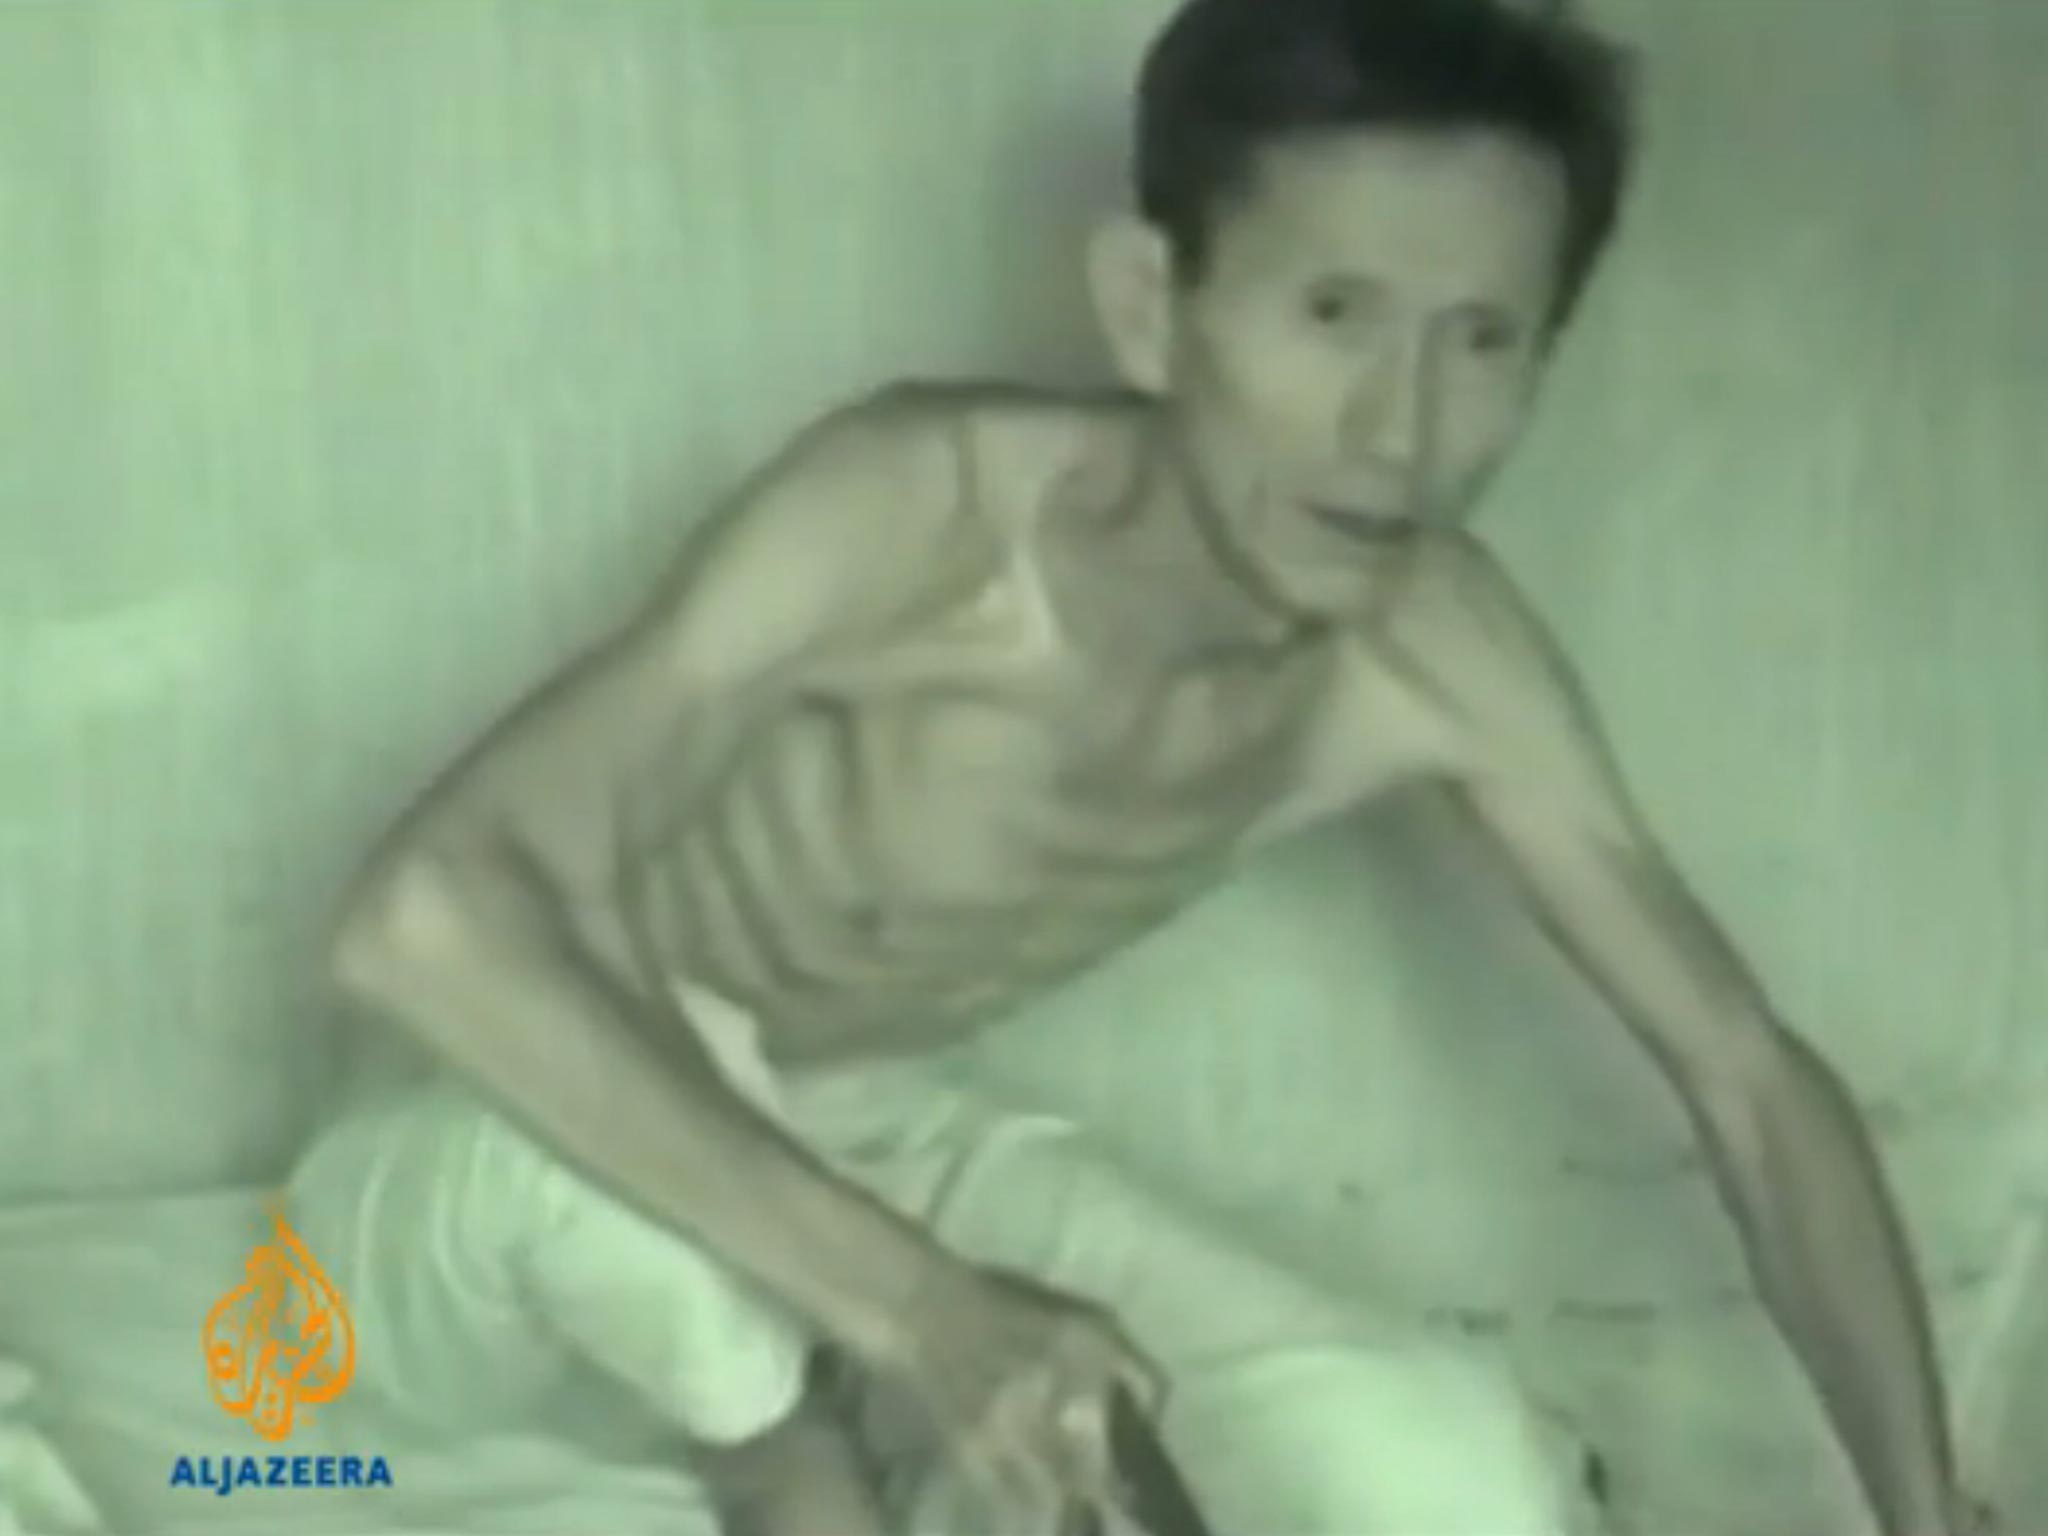 A man suffering from extreme starvation shown in an Al Jazeera report on North Korea.